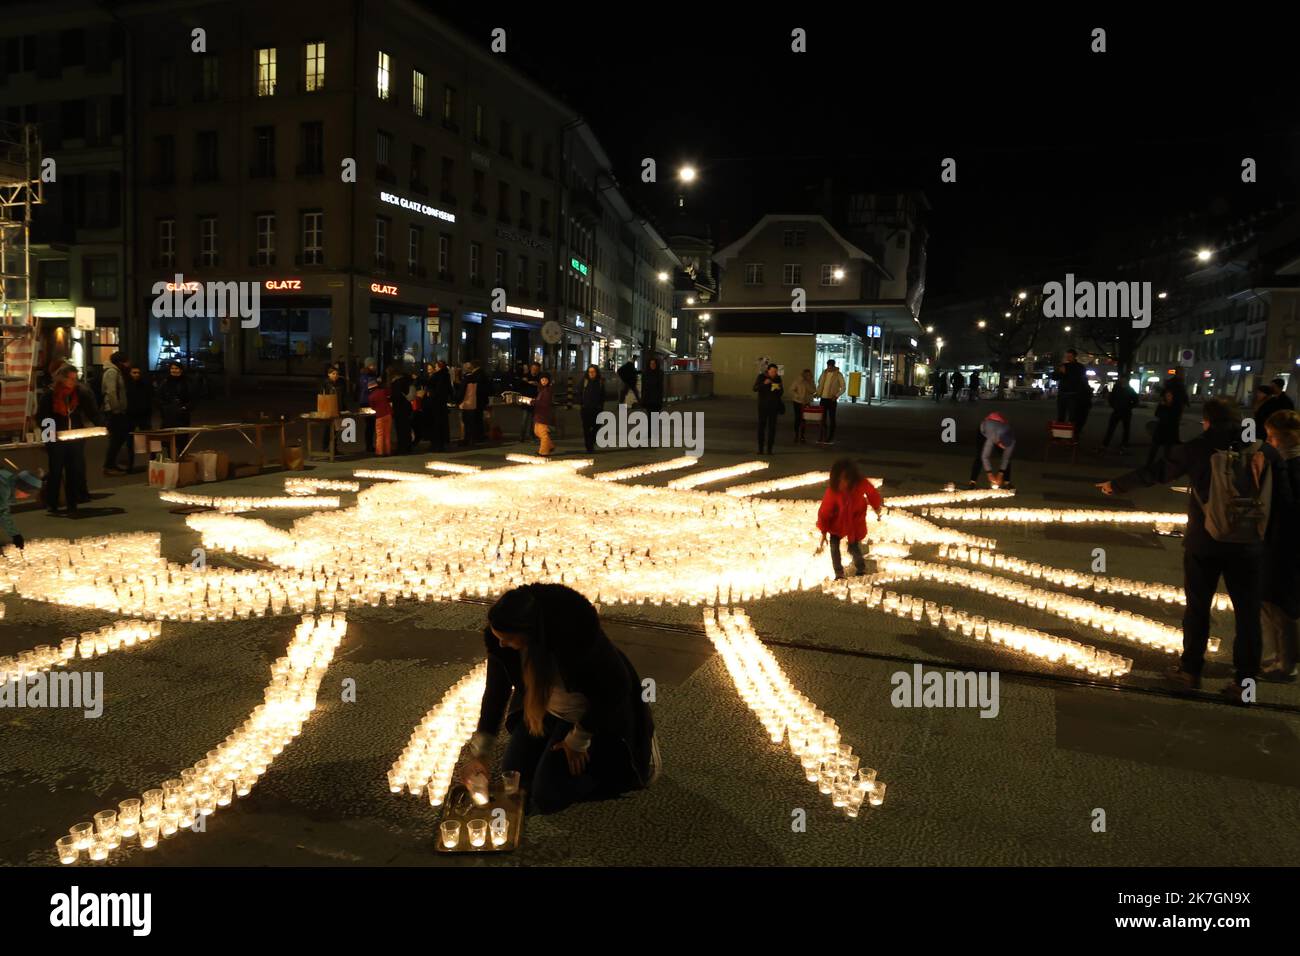 ©Francois Glories/MAXPPP - 11/03/2022 10,000 candles for peace' action in the Swiss Capital Bern,the national churches, the Jewish communities and the 'Offene Kirche Bern' invite citizens to light candles for peace on the Waisenhausplatz near the Federal Palace. Bern Switzerland. March 11, 2022. Stock Photo